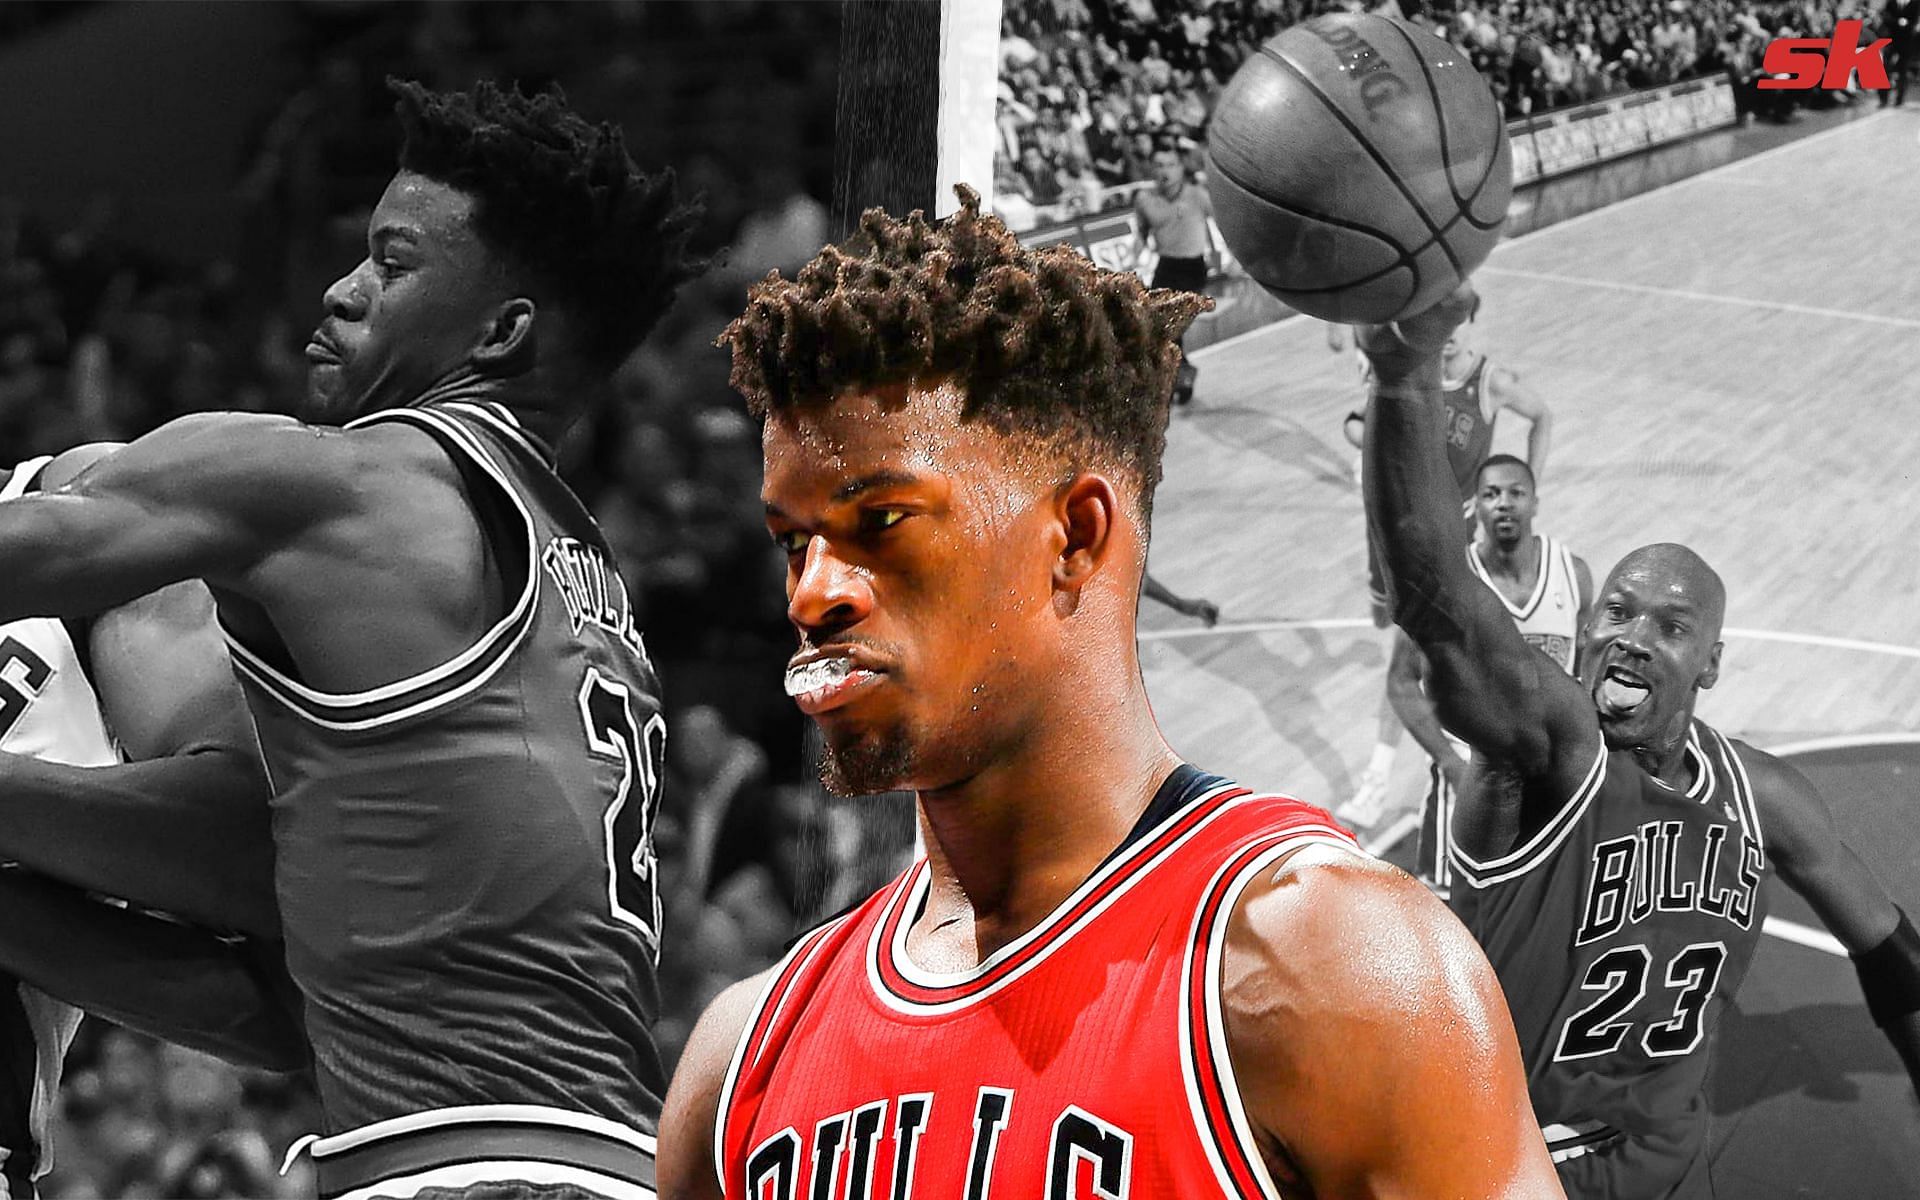 Jimmy Butler exploded for 53 points on this day six years ago